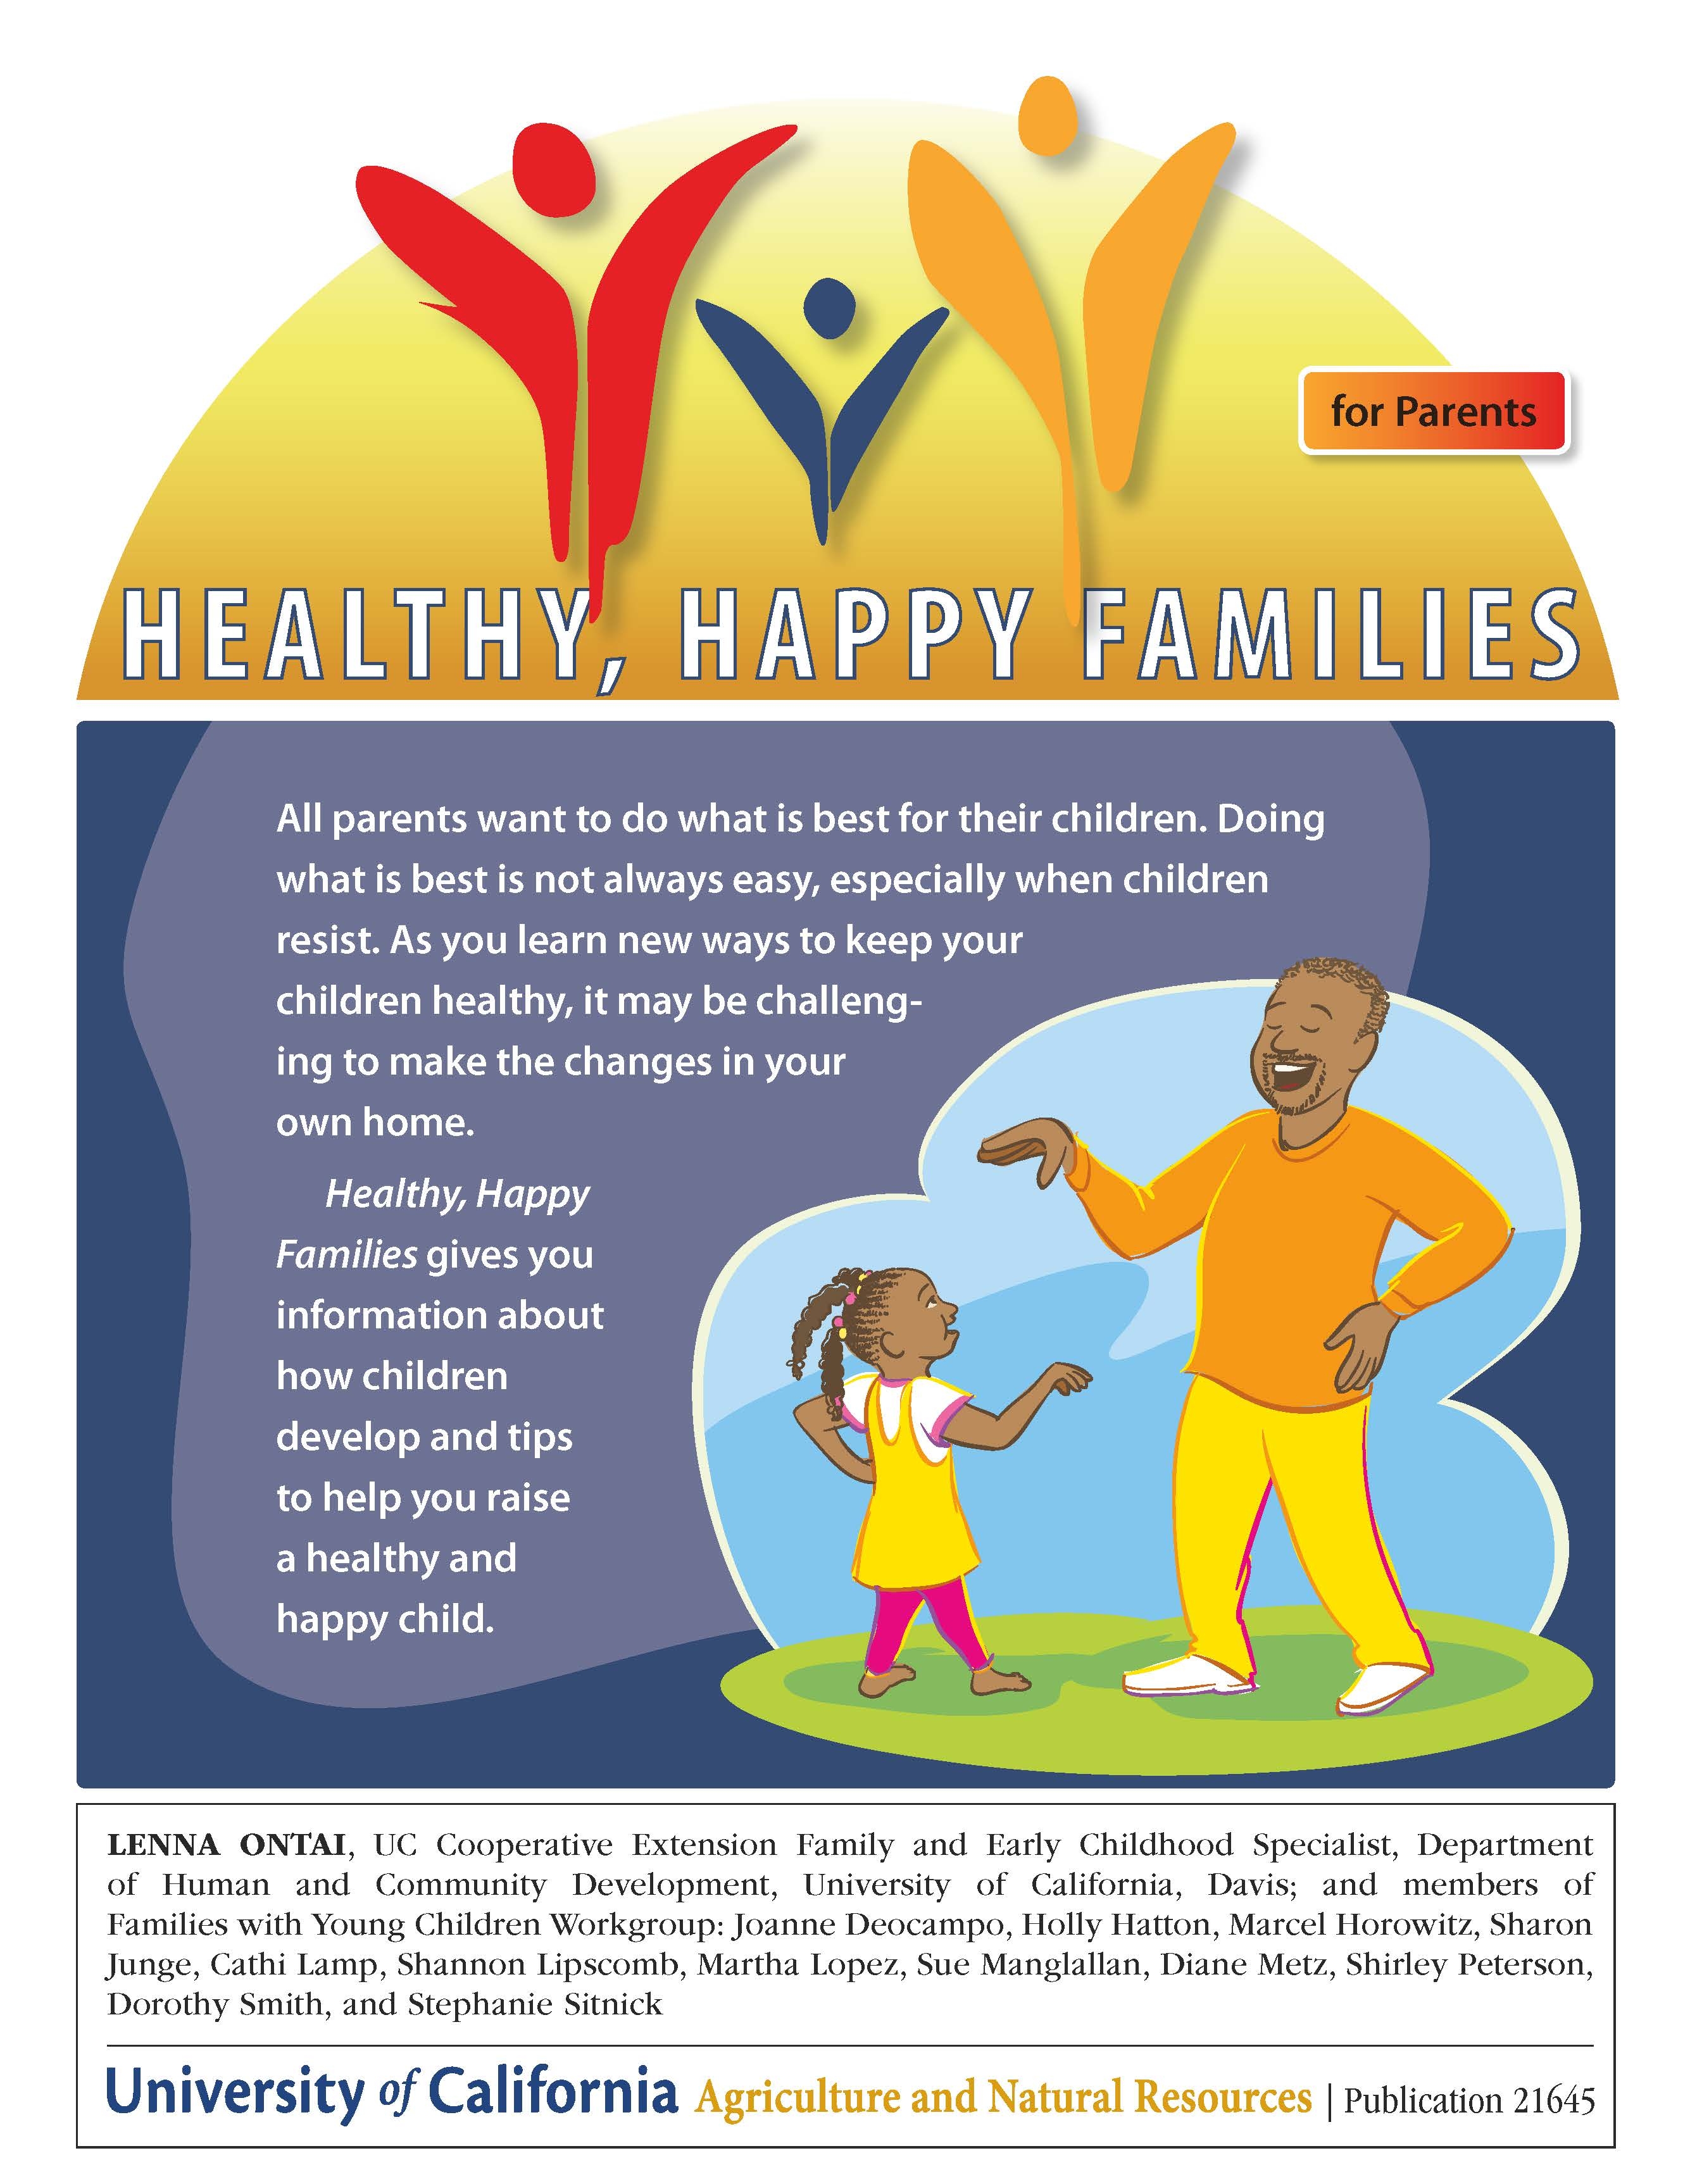 5 ways to keep your family healthy and happy during Family Health Month